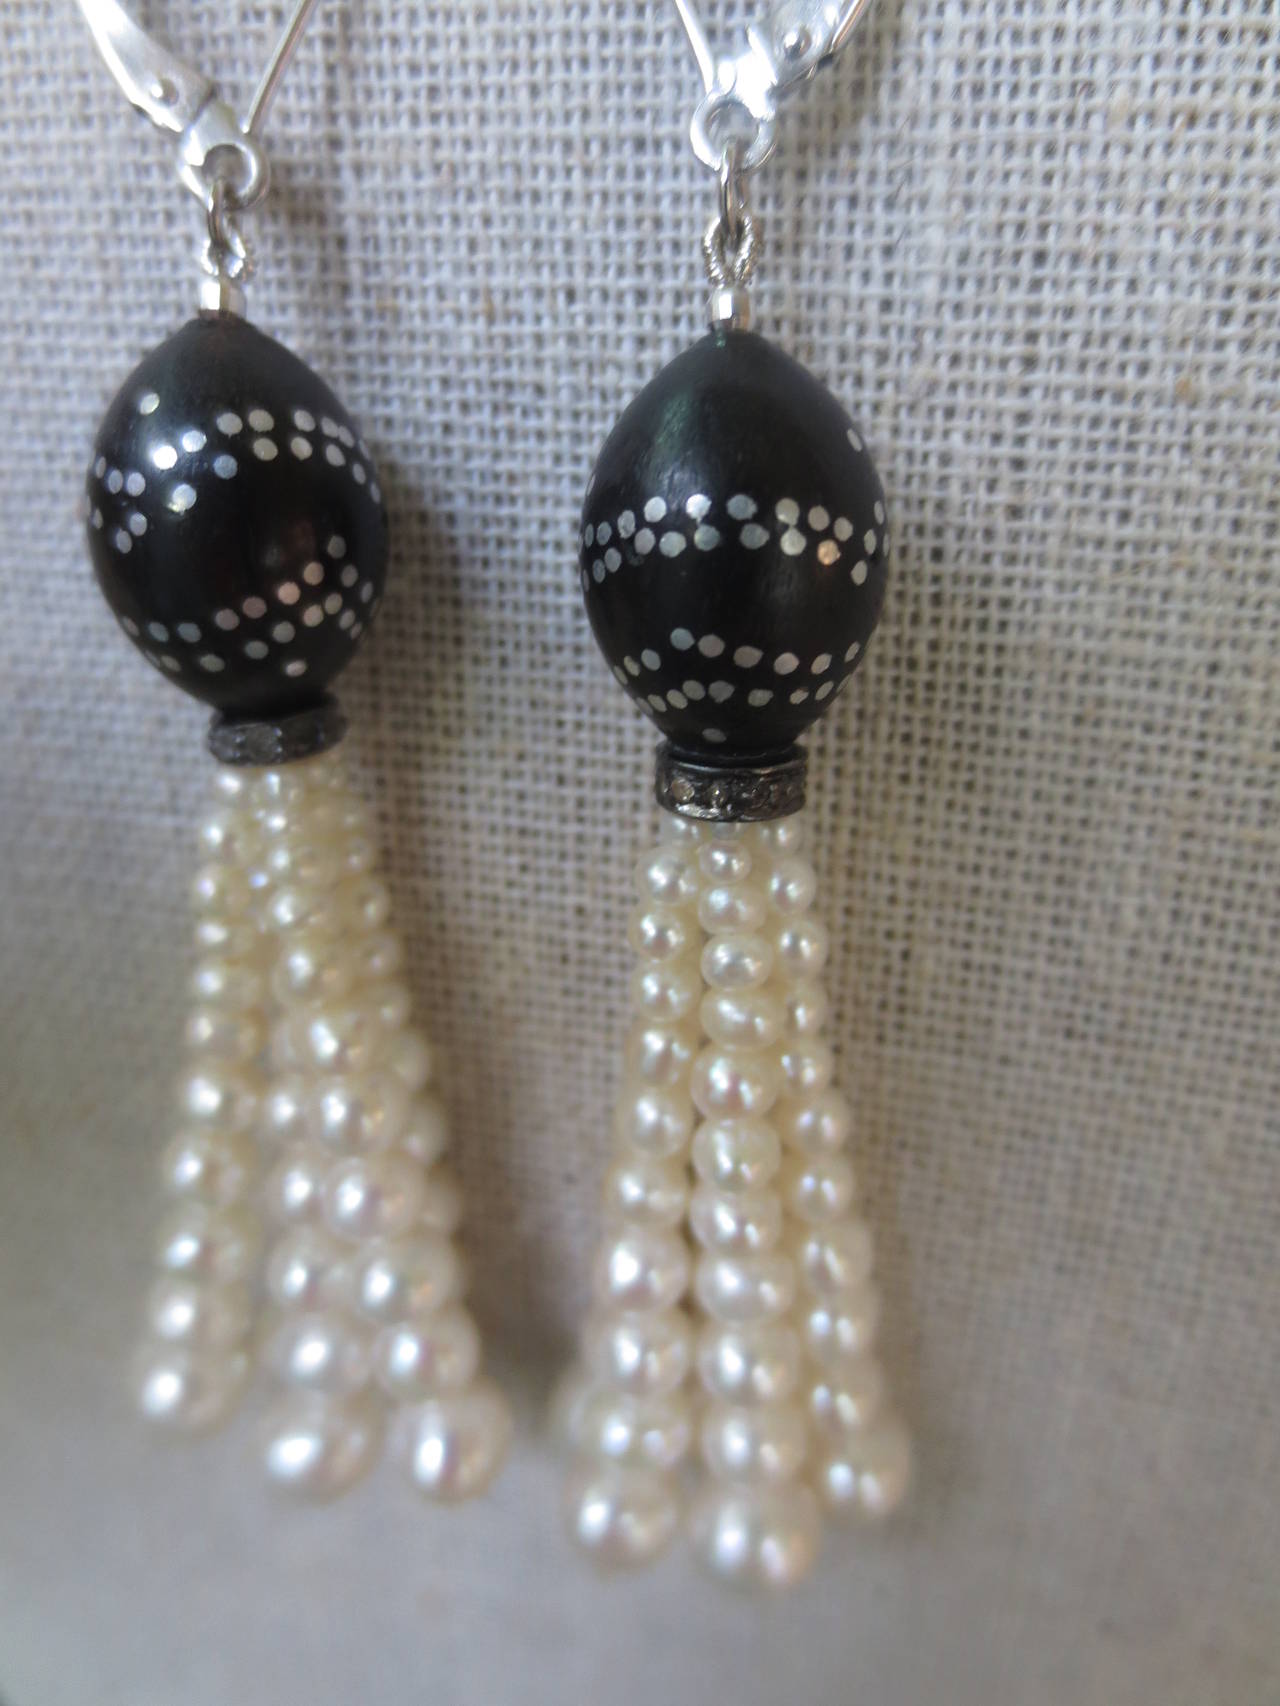 These elegant earrings feature graduated pearl strands suspended from vintage bead caps. The dark caps are made of wooden beads with silver nail inlay design and are accented with a diamond encrusted sterling silver roundel at the base. Ear-wires